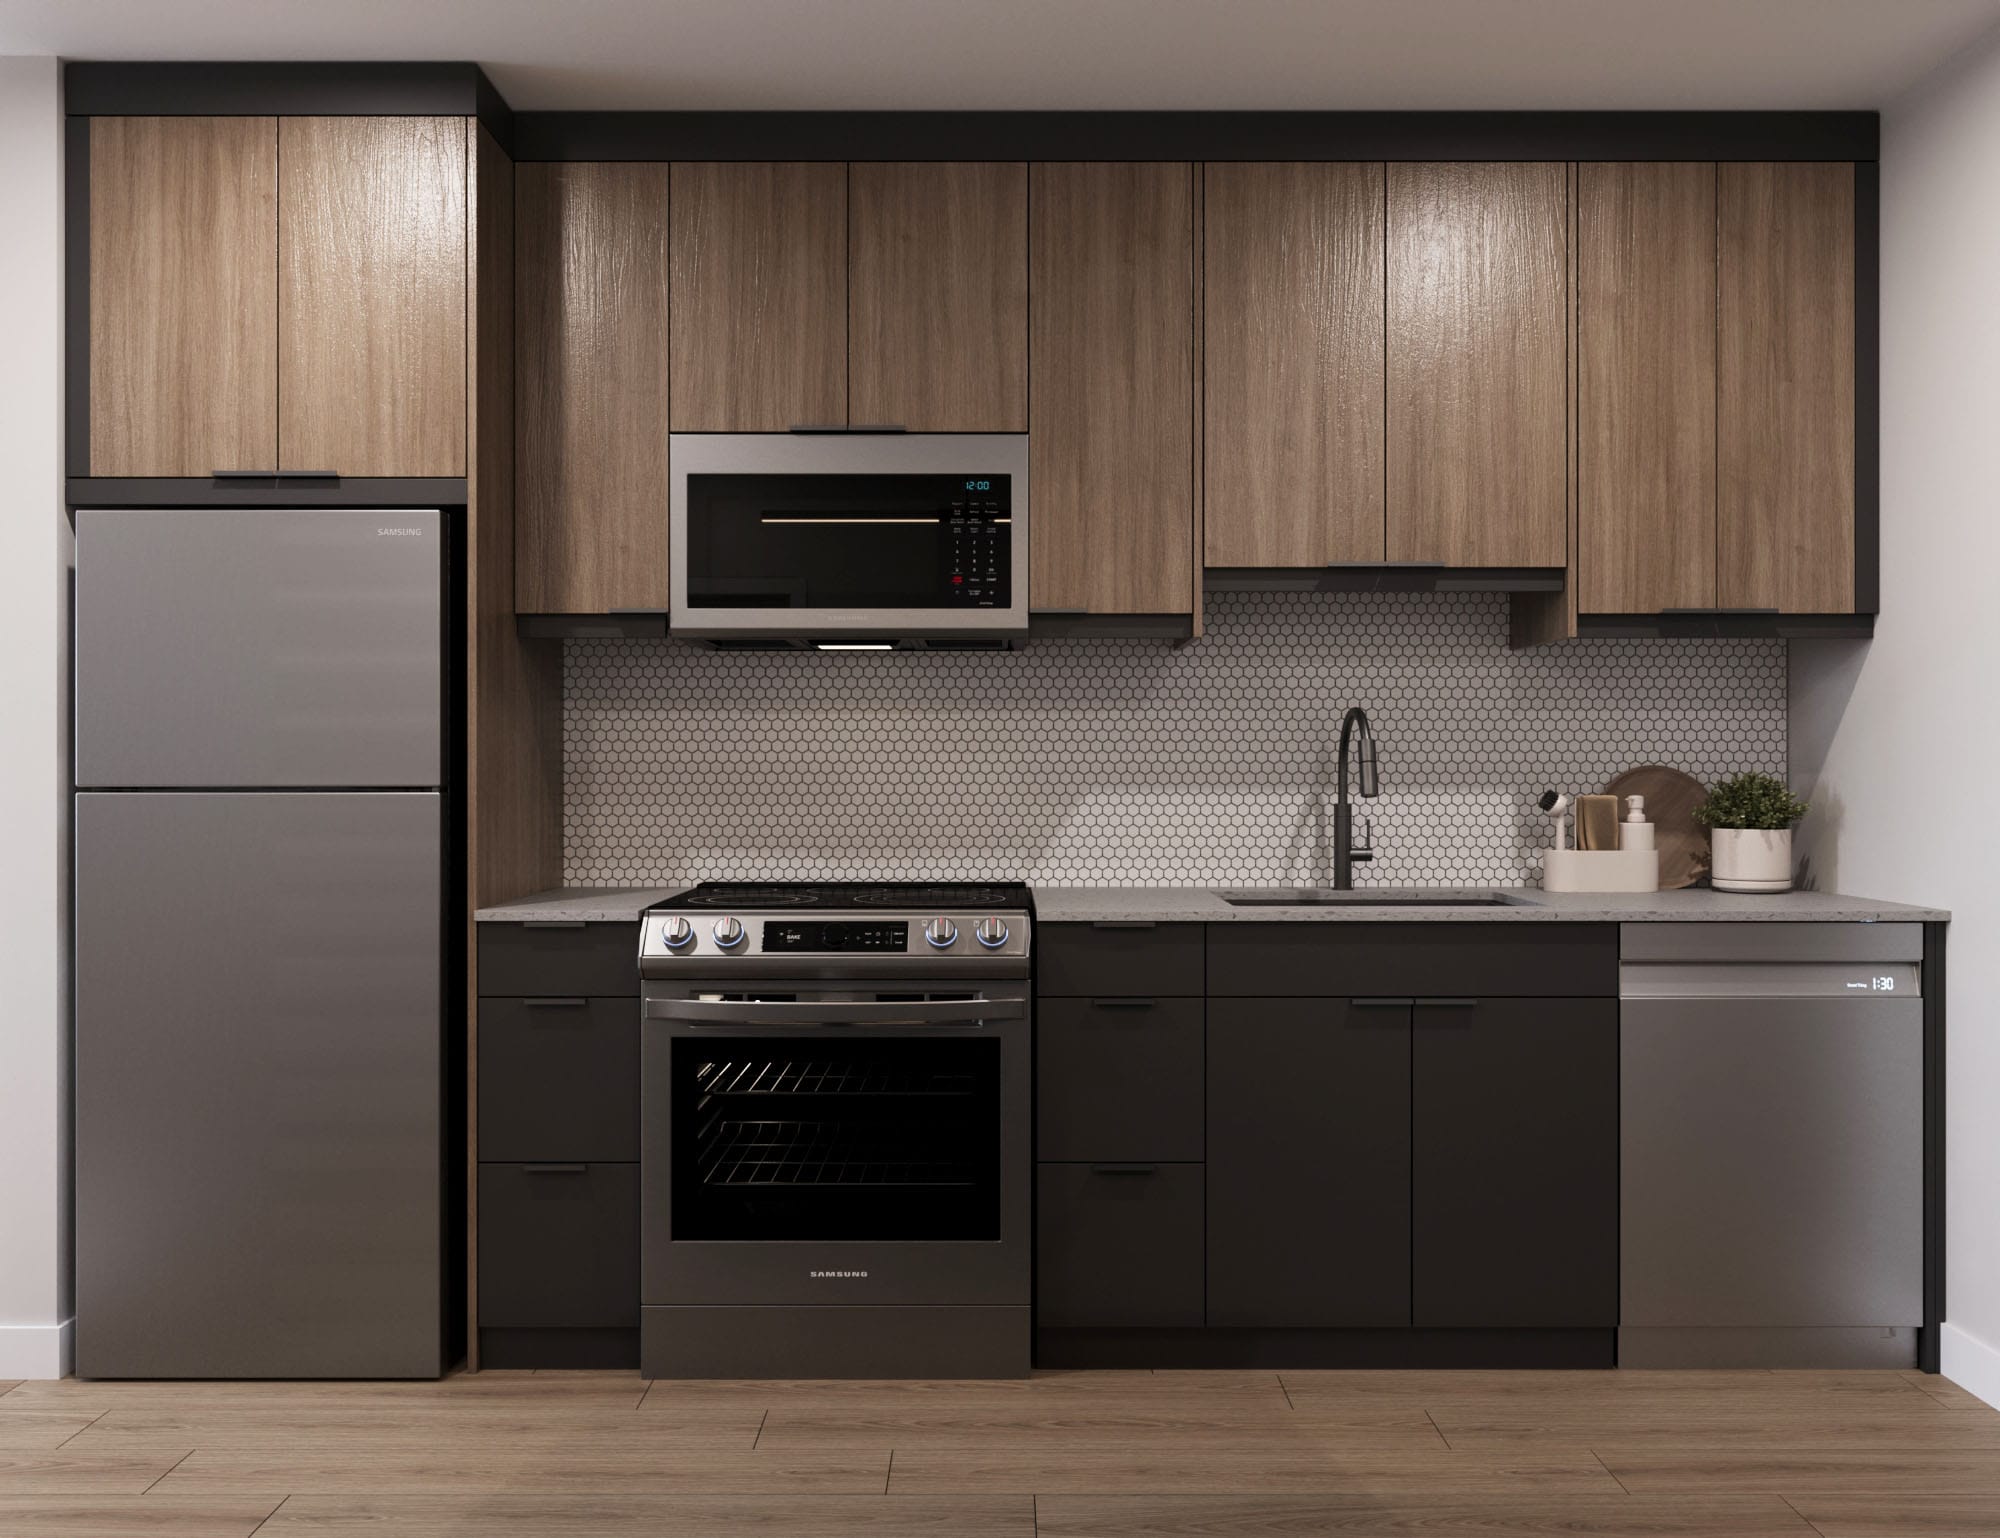 Modern, dark kitchen with kitchen island with bar stools and stainless steel appliances. Located at The Cornerstone.